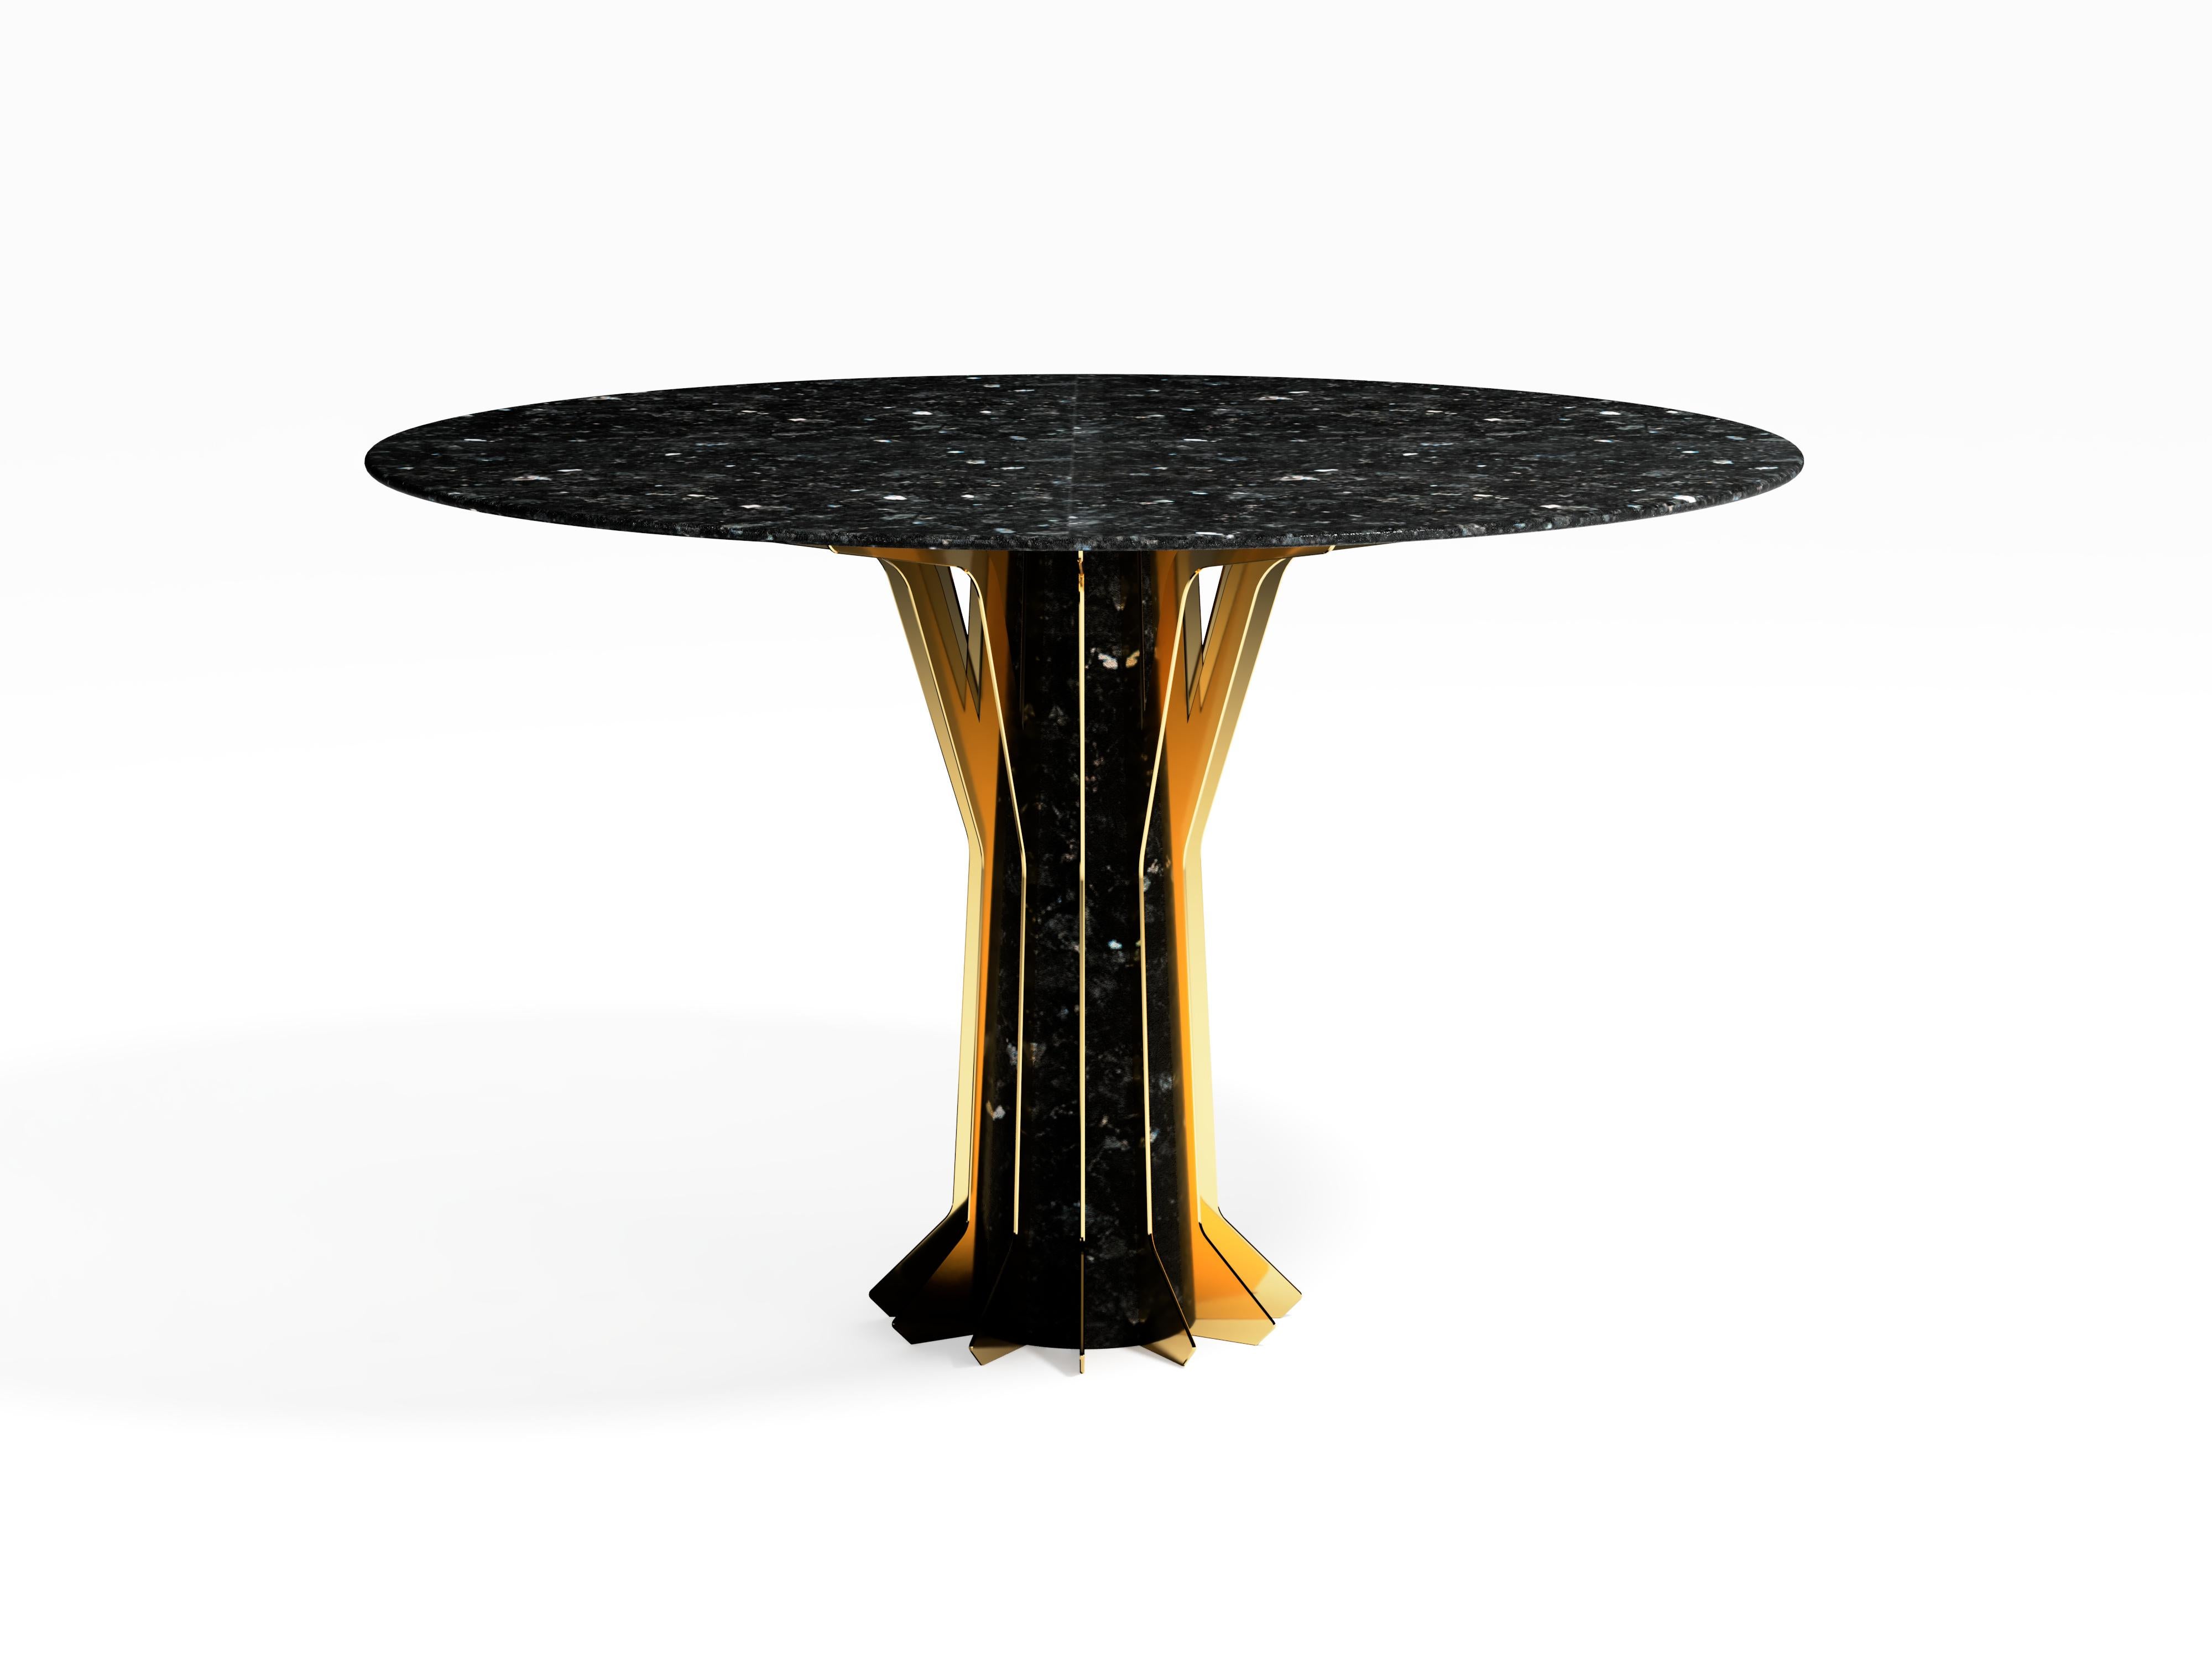 Elegance exemplified in table's understated simplicity. As a tribute to embellishment we have designed the Icar's Wings center table, a fascinating piece of furniture that will look stunningly at your living room.
Made from high quality natural